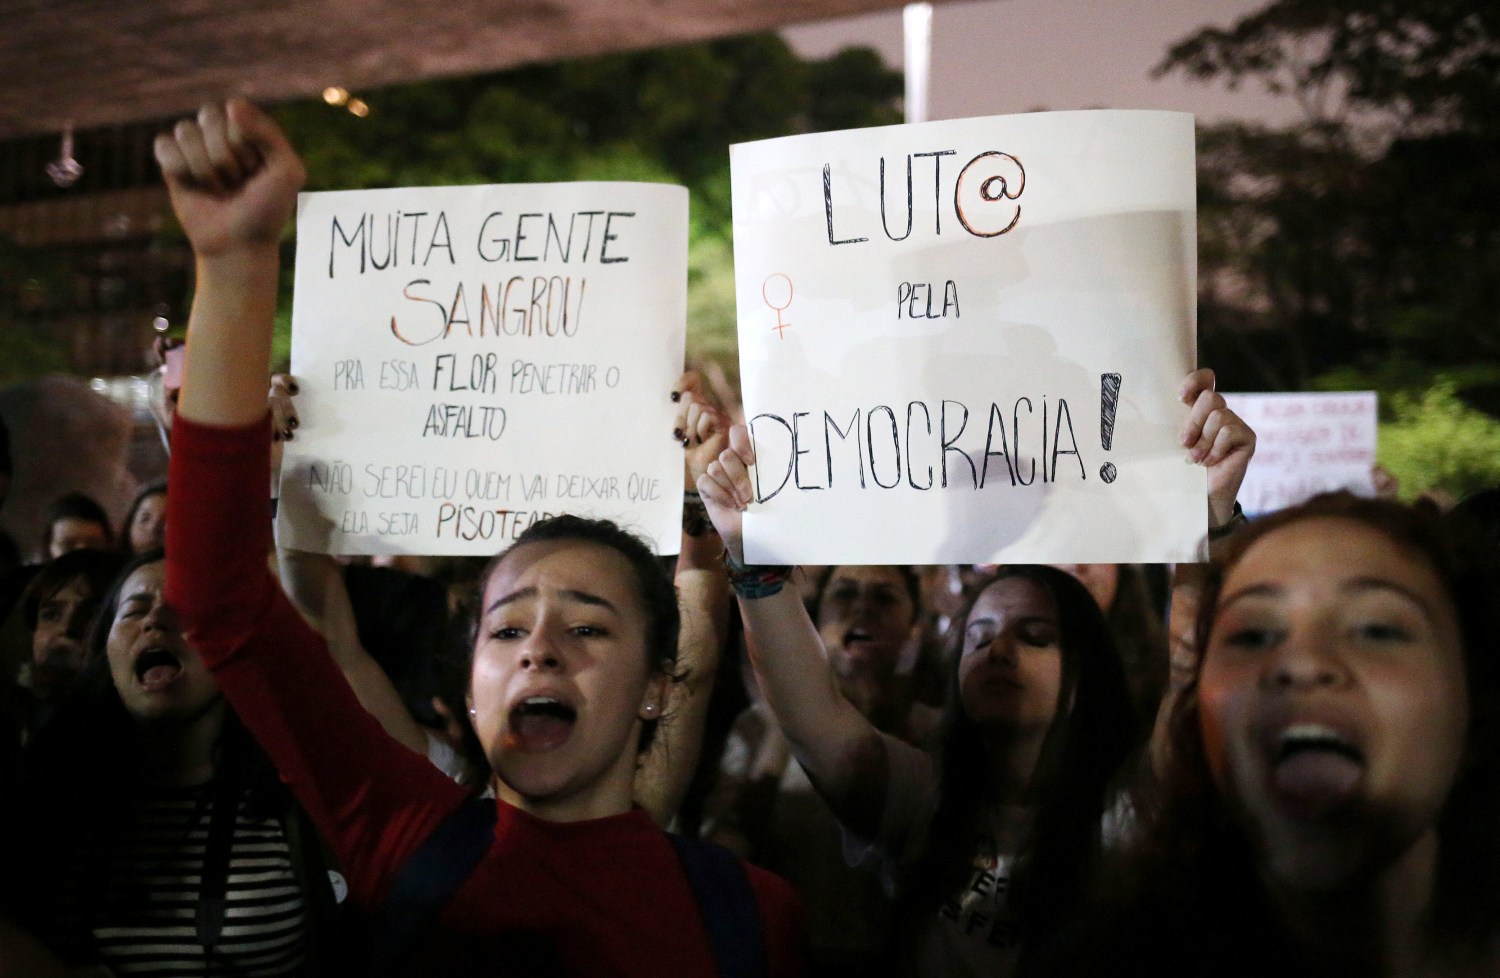 Demonstrators shout slogans against Jair Bolsonaro, far-right lawmaker and presidential candidate of the Social Liberal Party (PSL), during a protest called "dictatorship never again" in Sao Paulo, Brazil October 10, 2018. The poster (R) reads: "Fight for democracy!" REUTERS/Amanda Perobelli - RC12E4A0D820